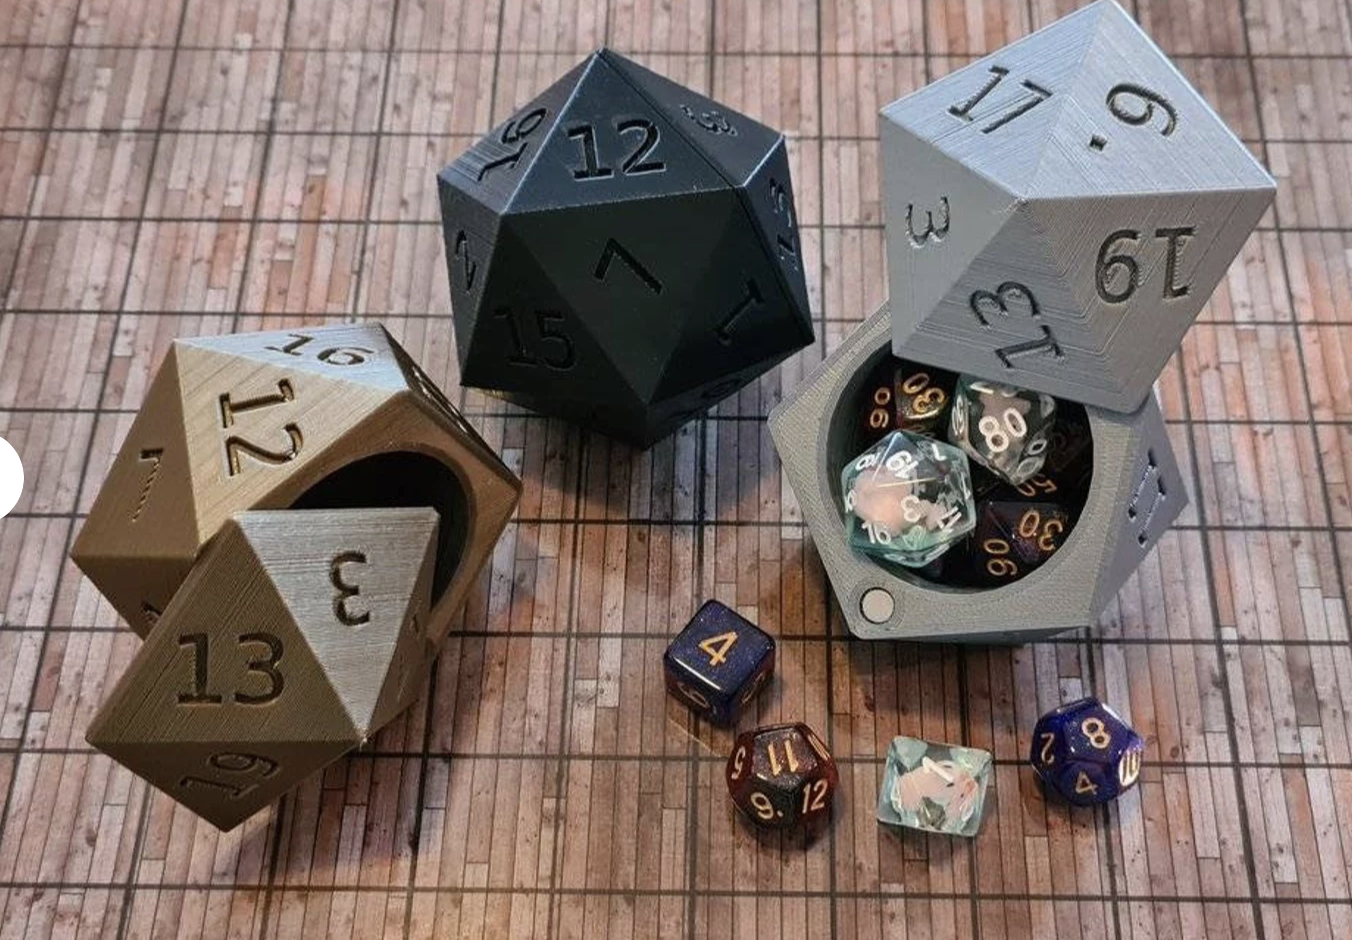 D20 storage box that can hold many different dice and D&D related items. 